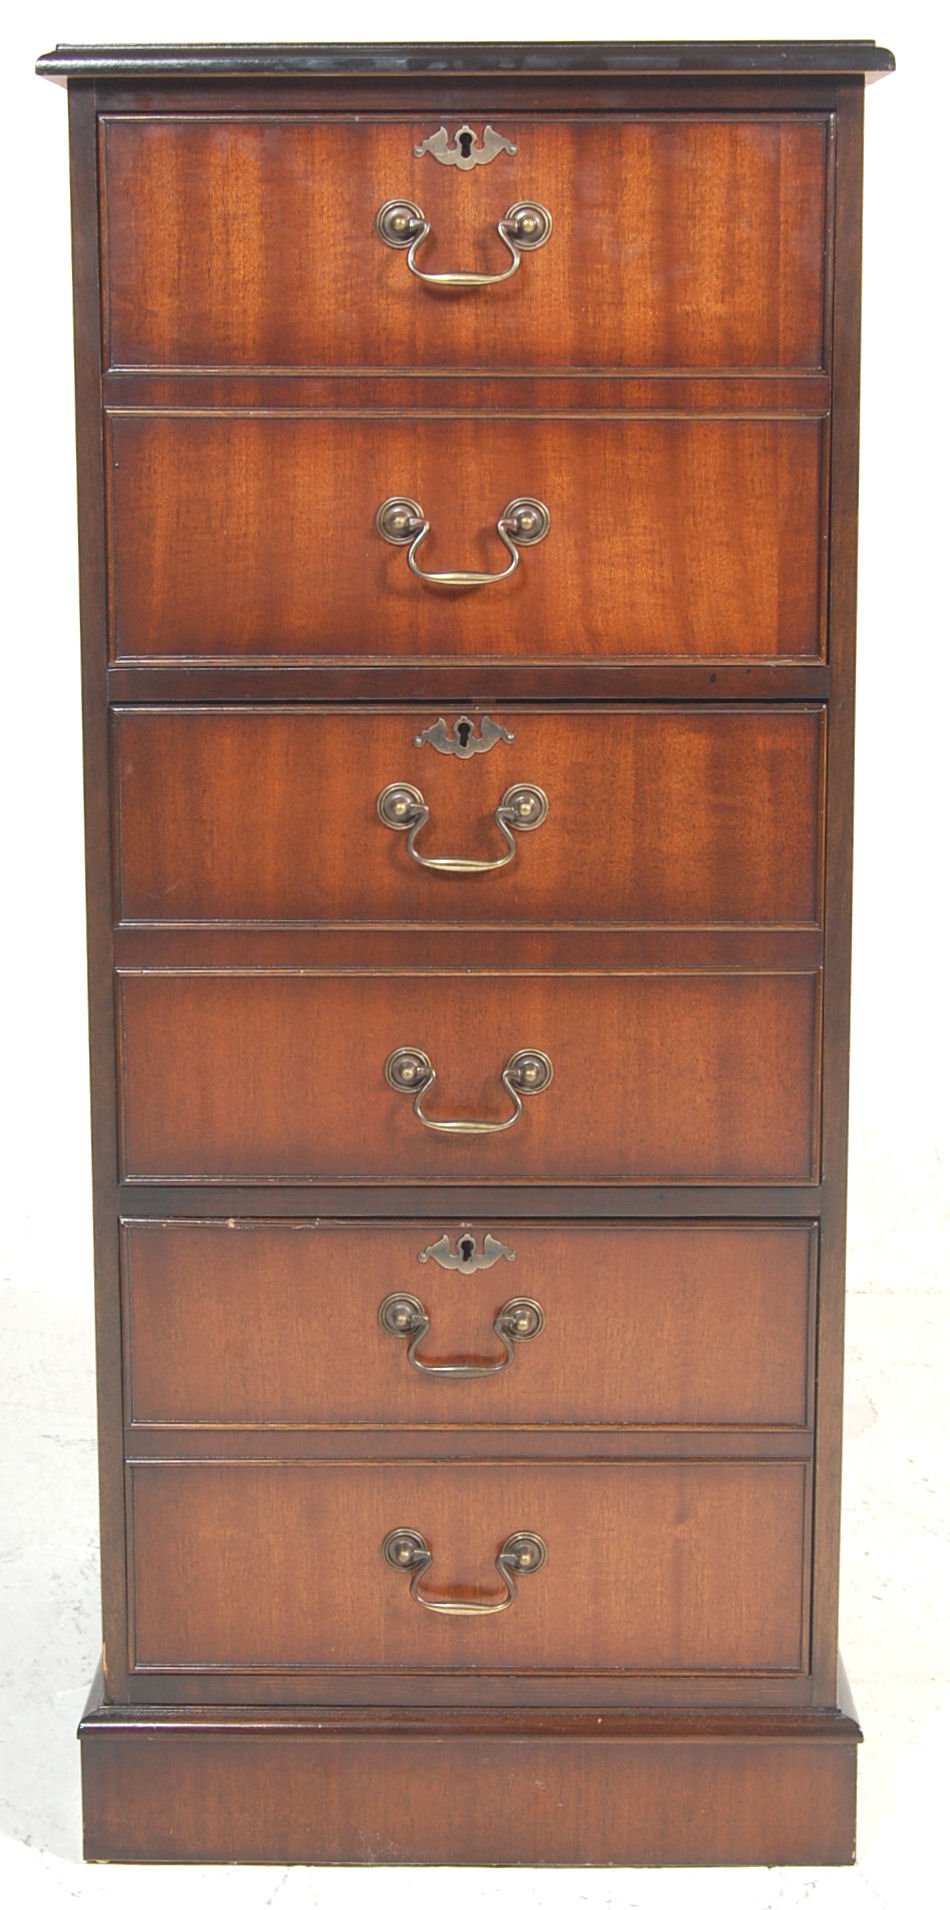 ANTIQUE STYLE MAHOGANY OFFICE FILING CABINET - Image 2 of 5